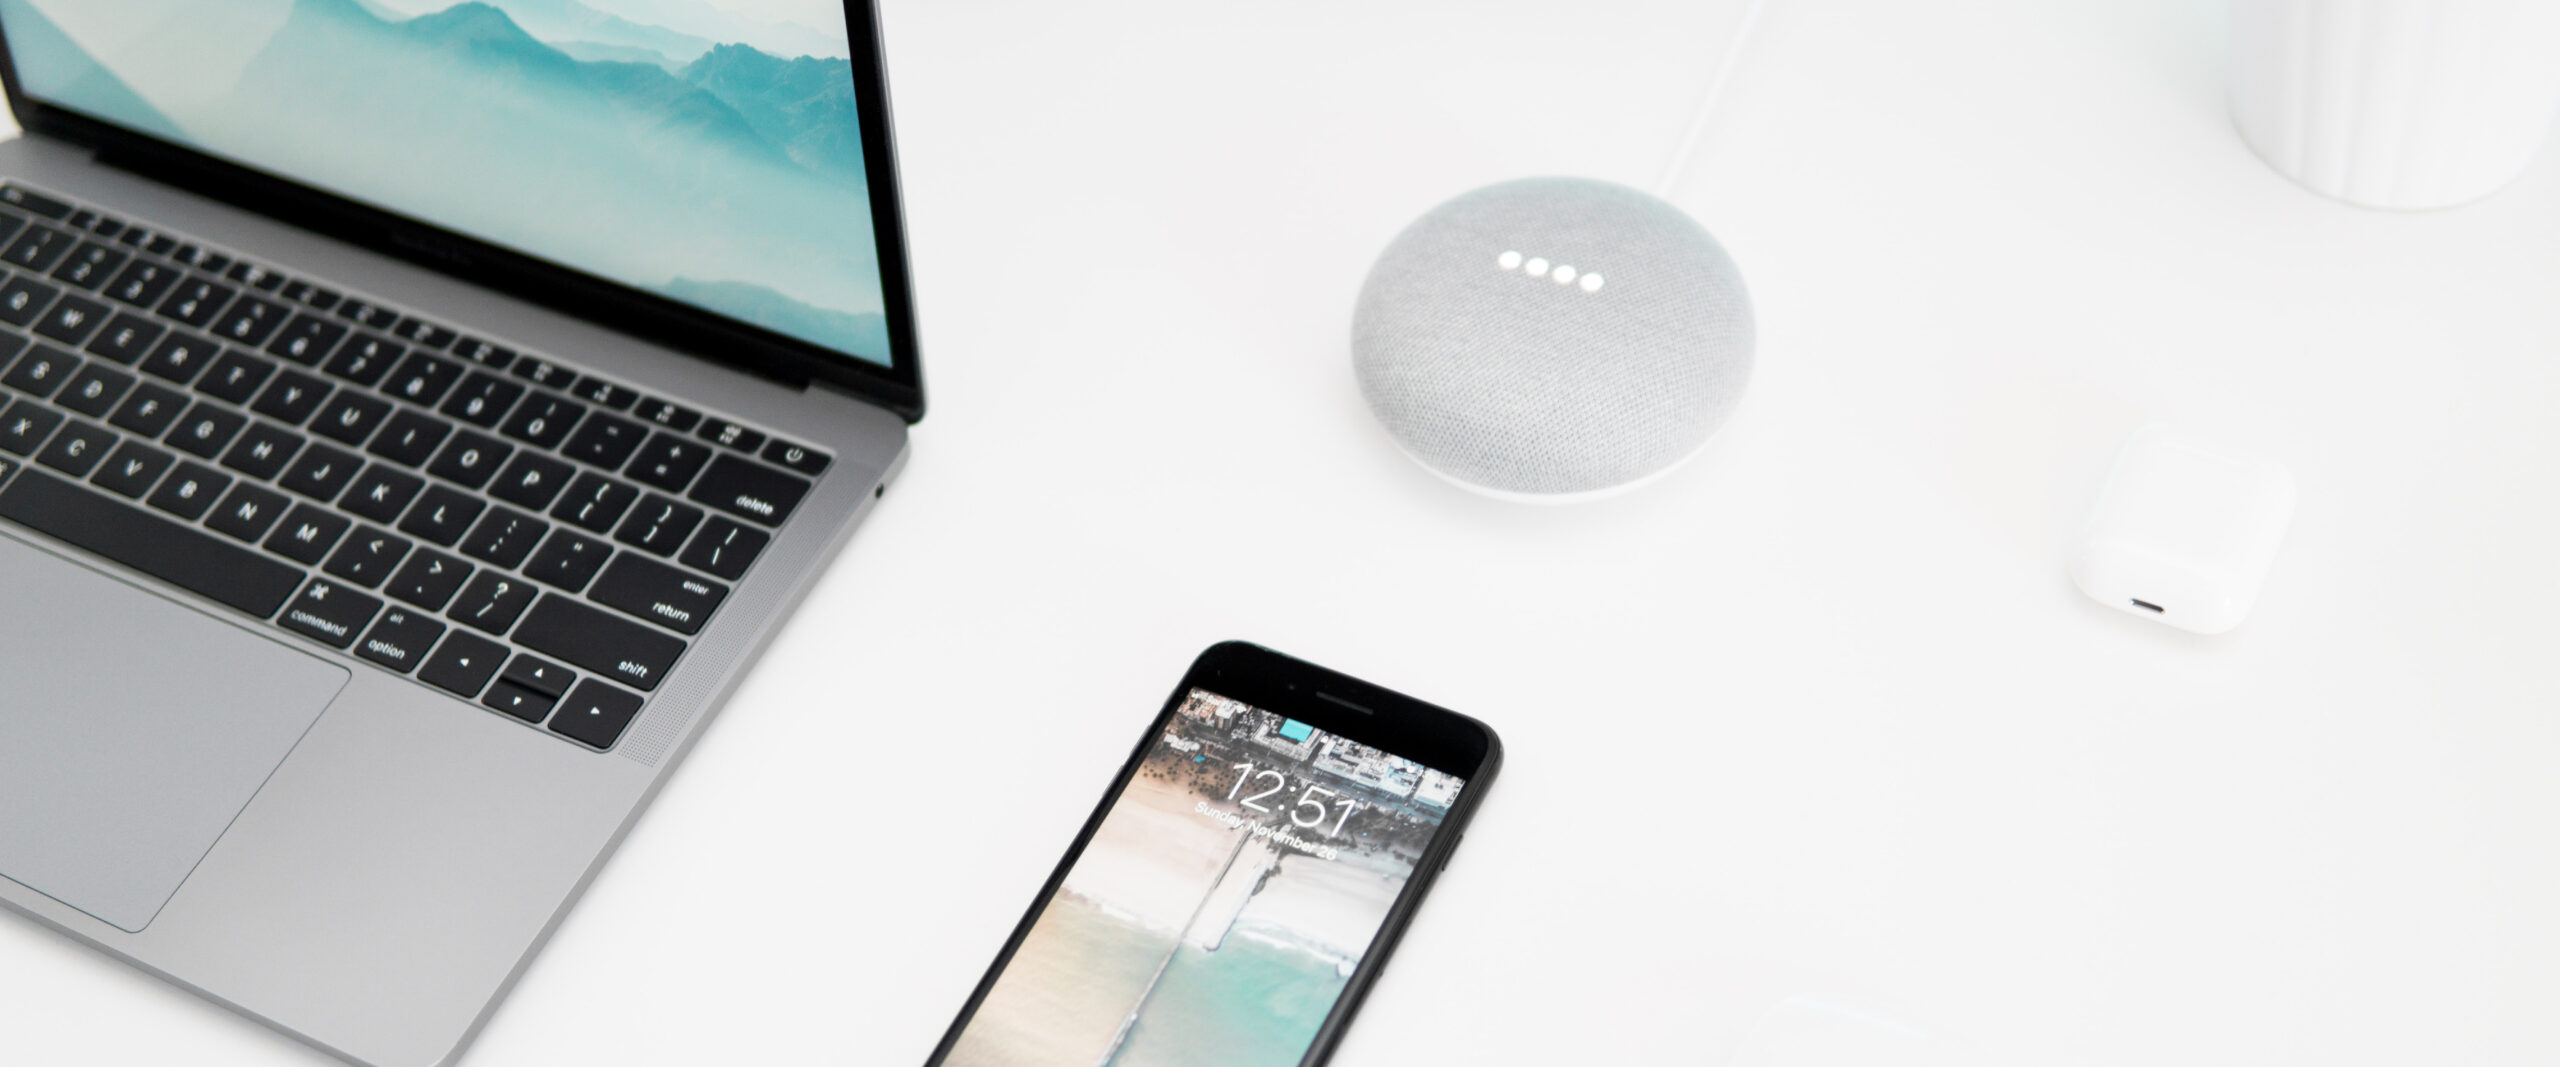 Is voice commerce the future of e-commerce?